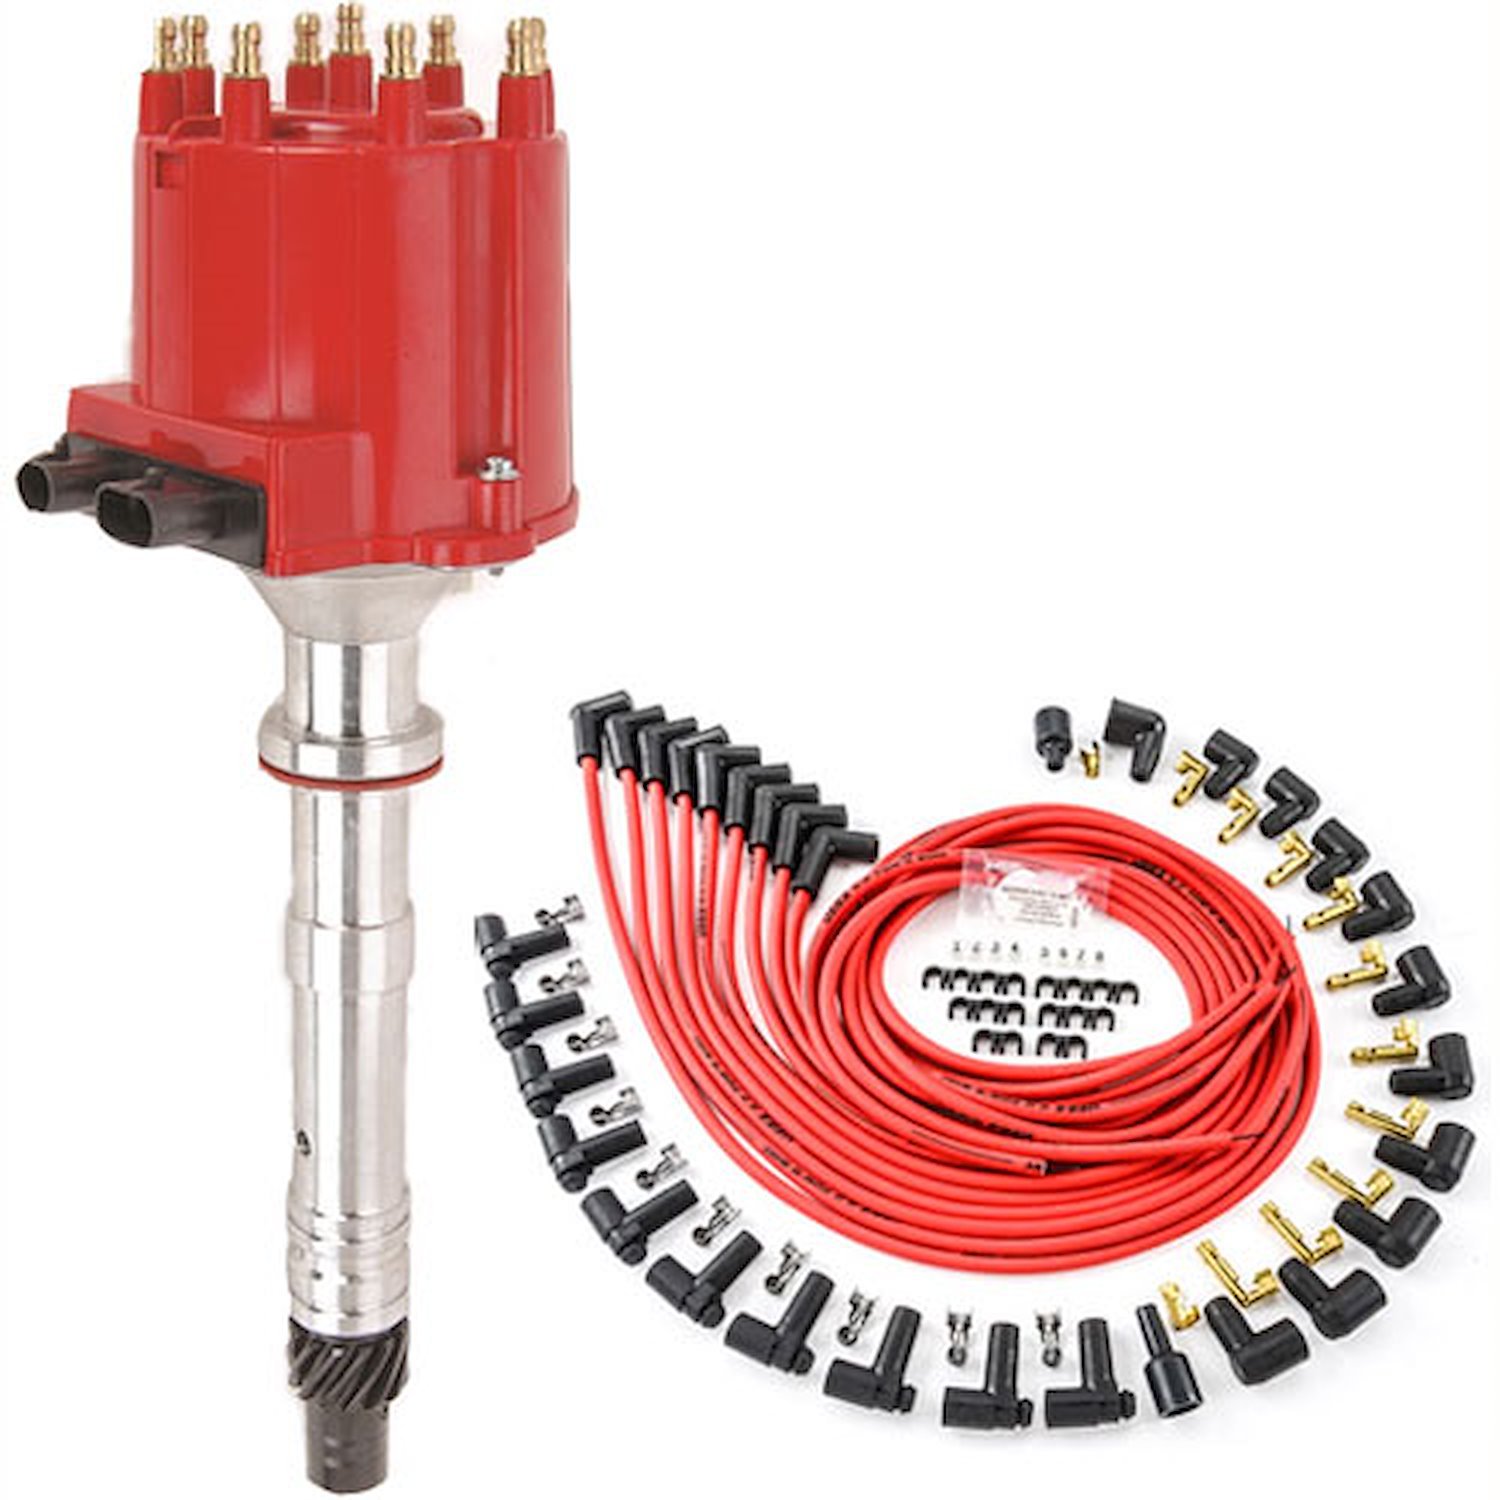 HEI Distributor and Spark Plug Wire Kit for 1987-1995 GM Models with V8 or V6 and External Coil